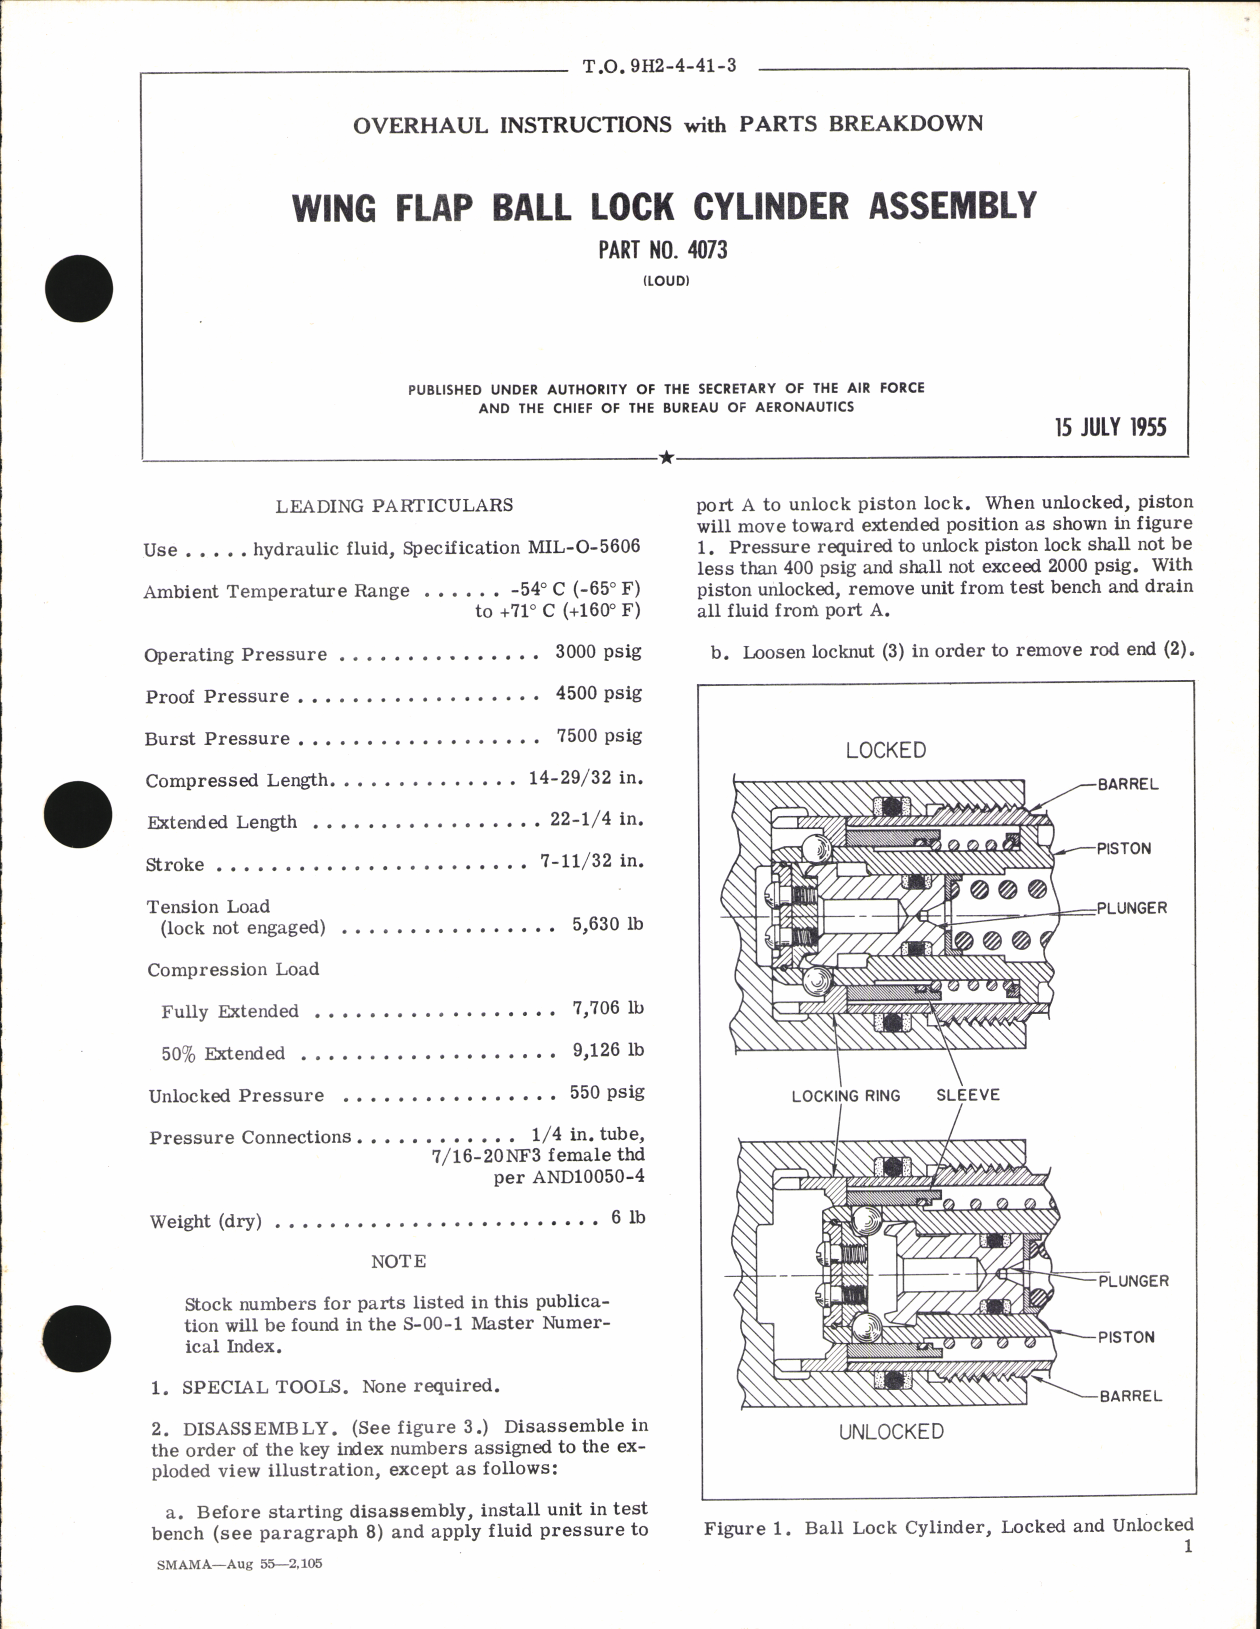 Sample page 1 from AirCorps Library document: Overhaul Instructions with Parts Breakdown for Wing Flap Ball Lock Cylinder Assembly Part No. 4073